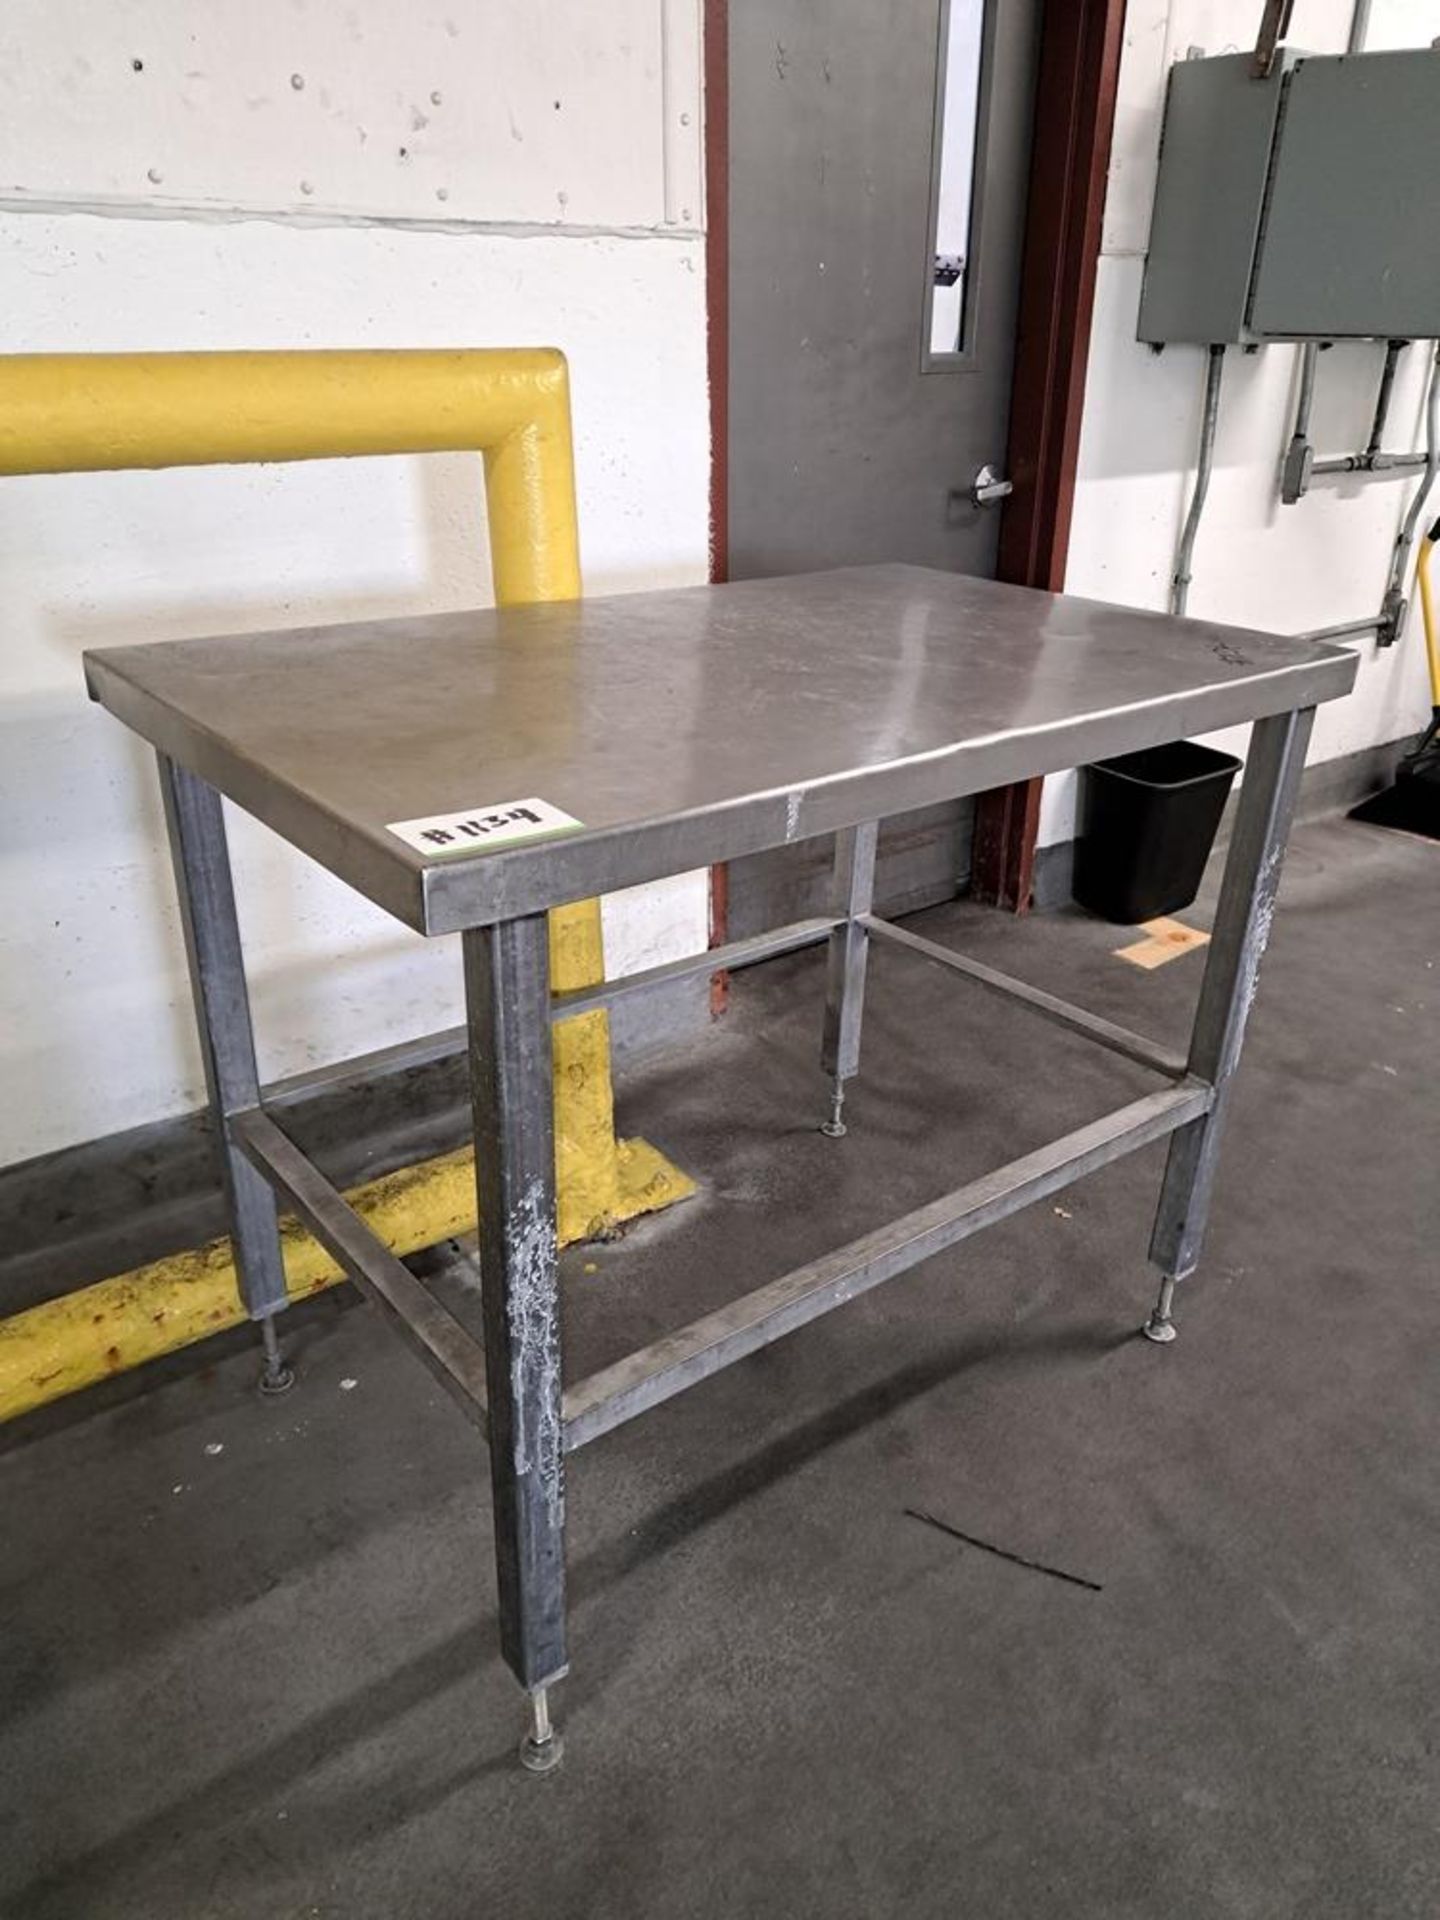 Stainless Steel Table, 30" W X 4' L X 40" T: Required Loading Fee $50.00, Rigger-Norm Pavlish,